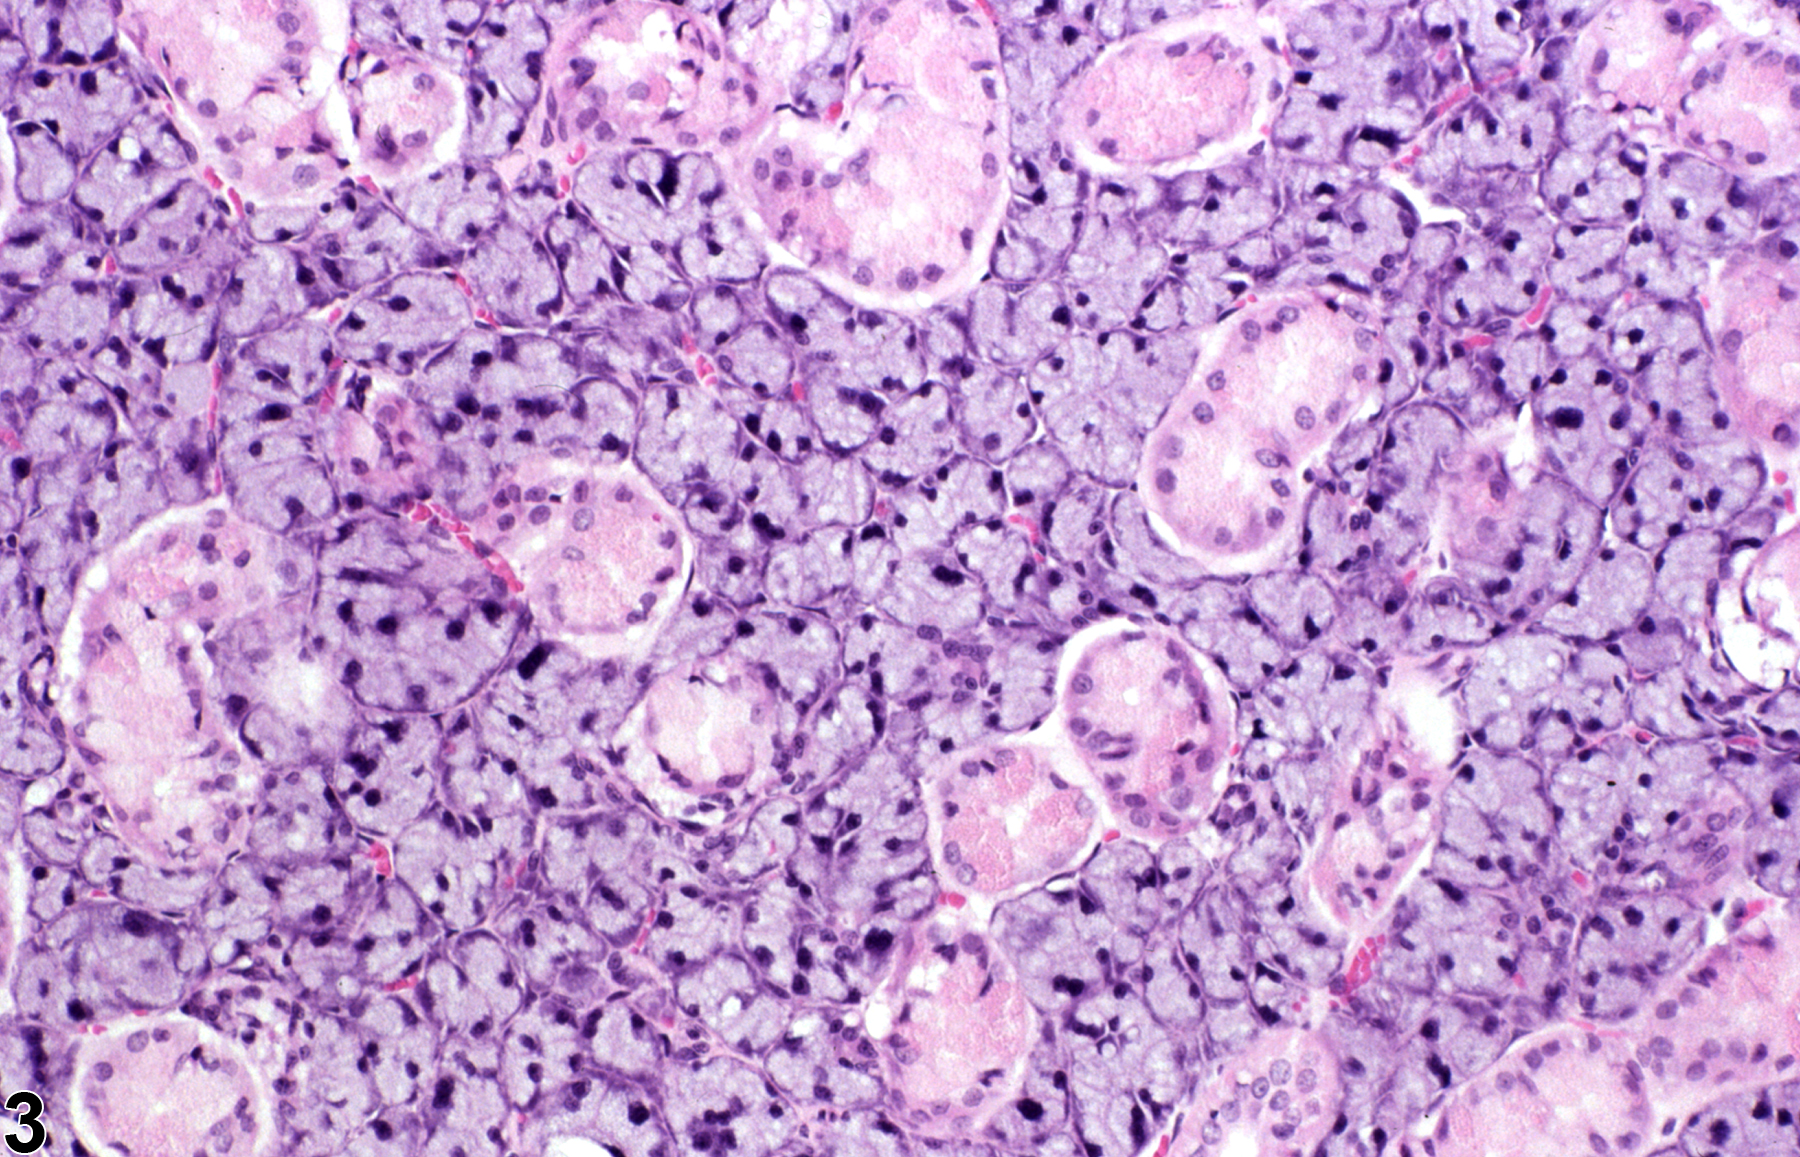 Image of normal comparison to hyperplasia in the salivary gland from a male F344/N rat in a subchronic study